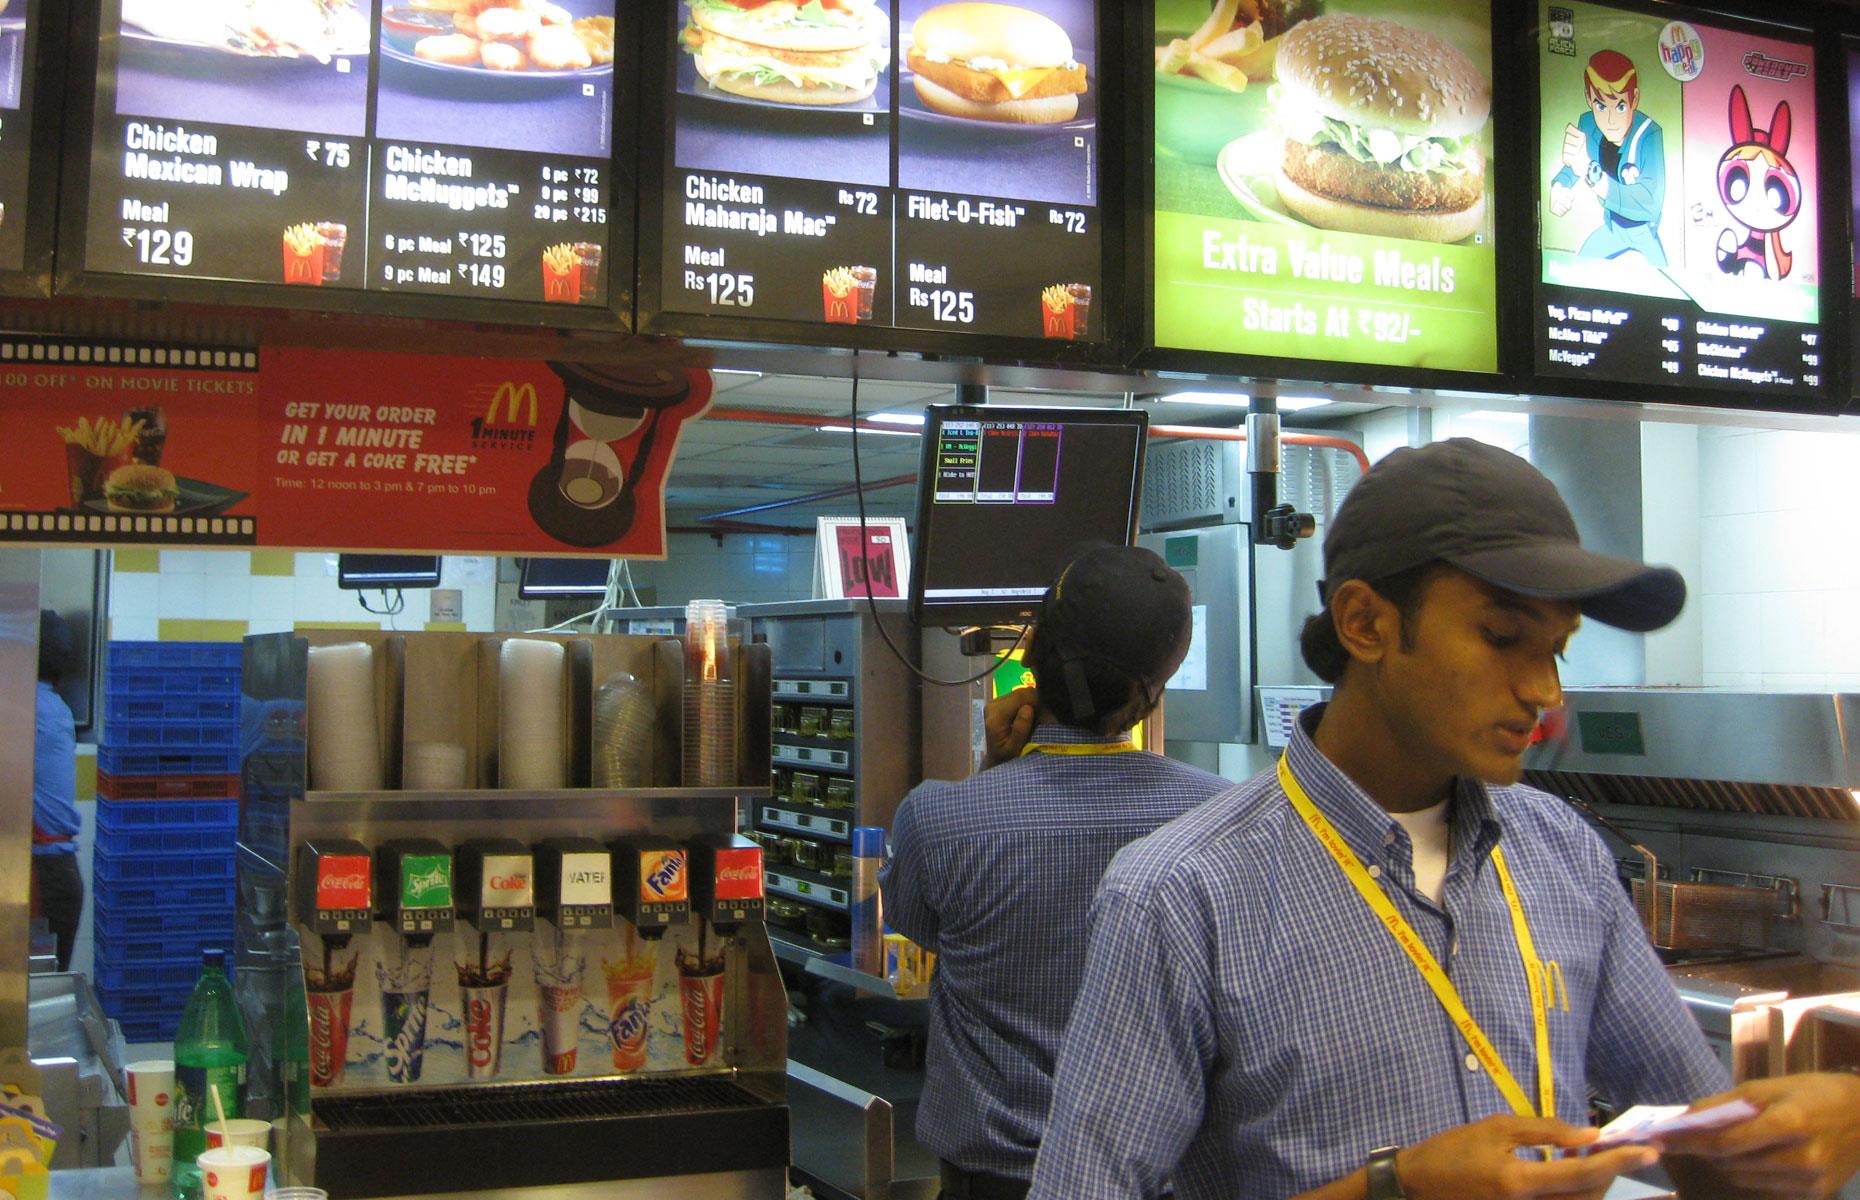 Lowest-paying country for fast food workers: India – $2,500 (£1.9k) average salary